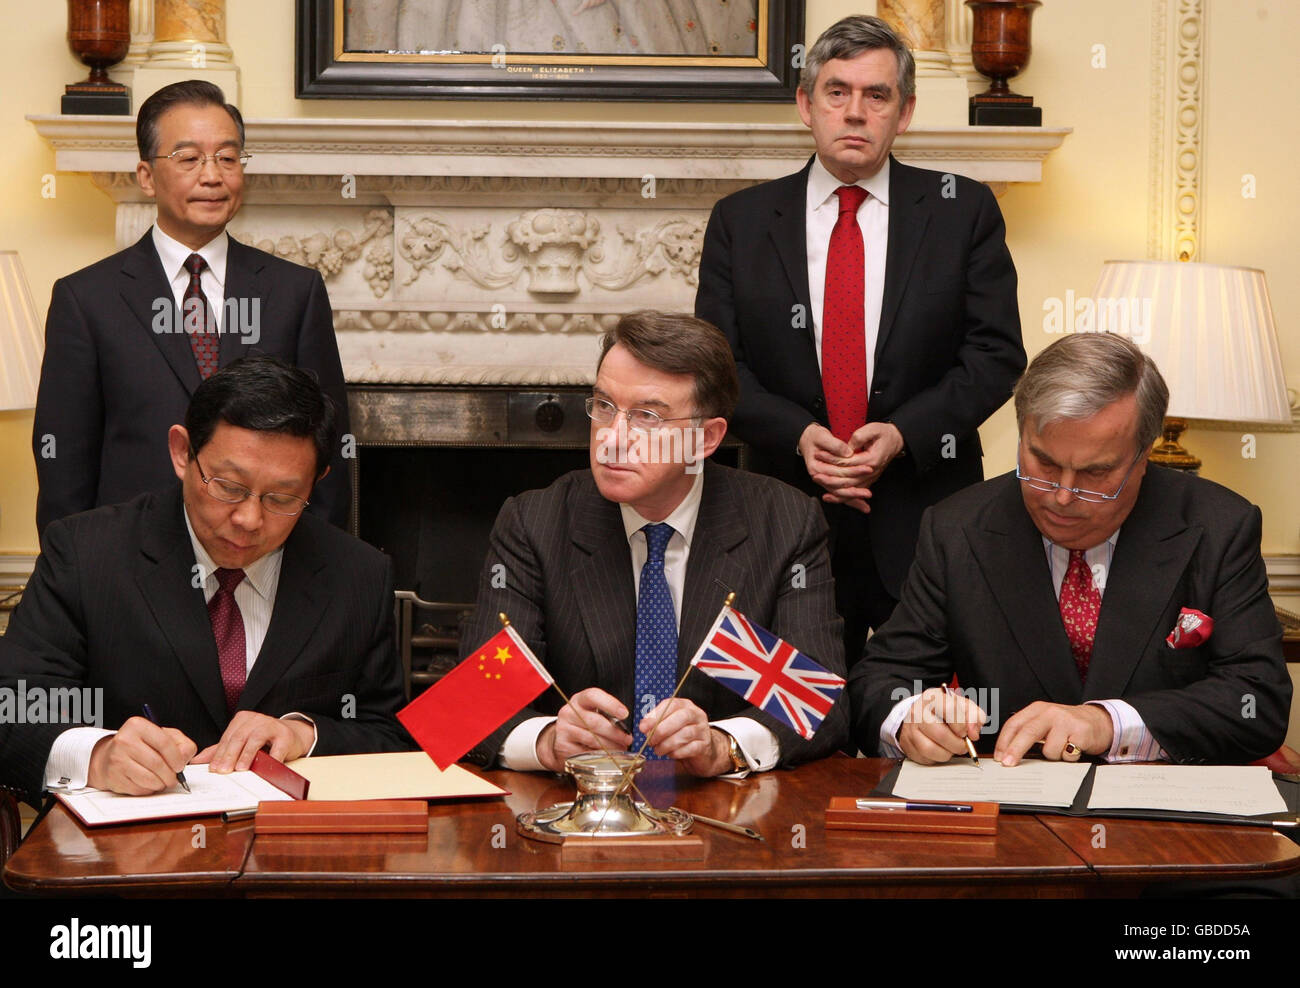 British Prime Minister Gordon Brown (standing right), Trade Secretary Peter Mandelson (centre) and Chinese Prime Minister Wen Jiabao (standing left) witness the signing of a trade deal at Number 10 Downing Street. Embarrassed Downing Street officials have been checking their supply of Union Flags after displaying one upside down at a high-profile event at Number 10. Stock Photo